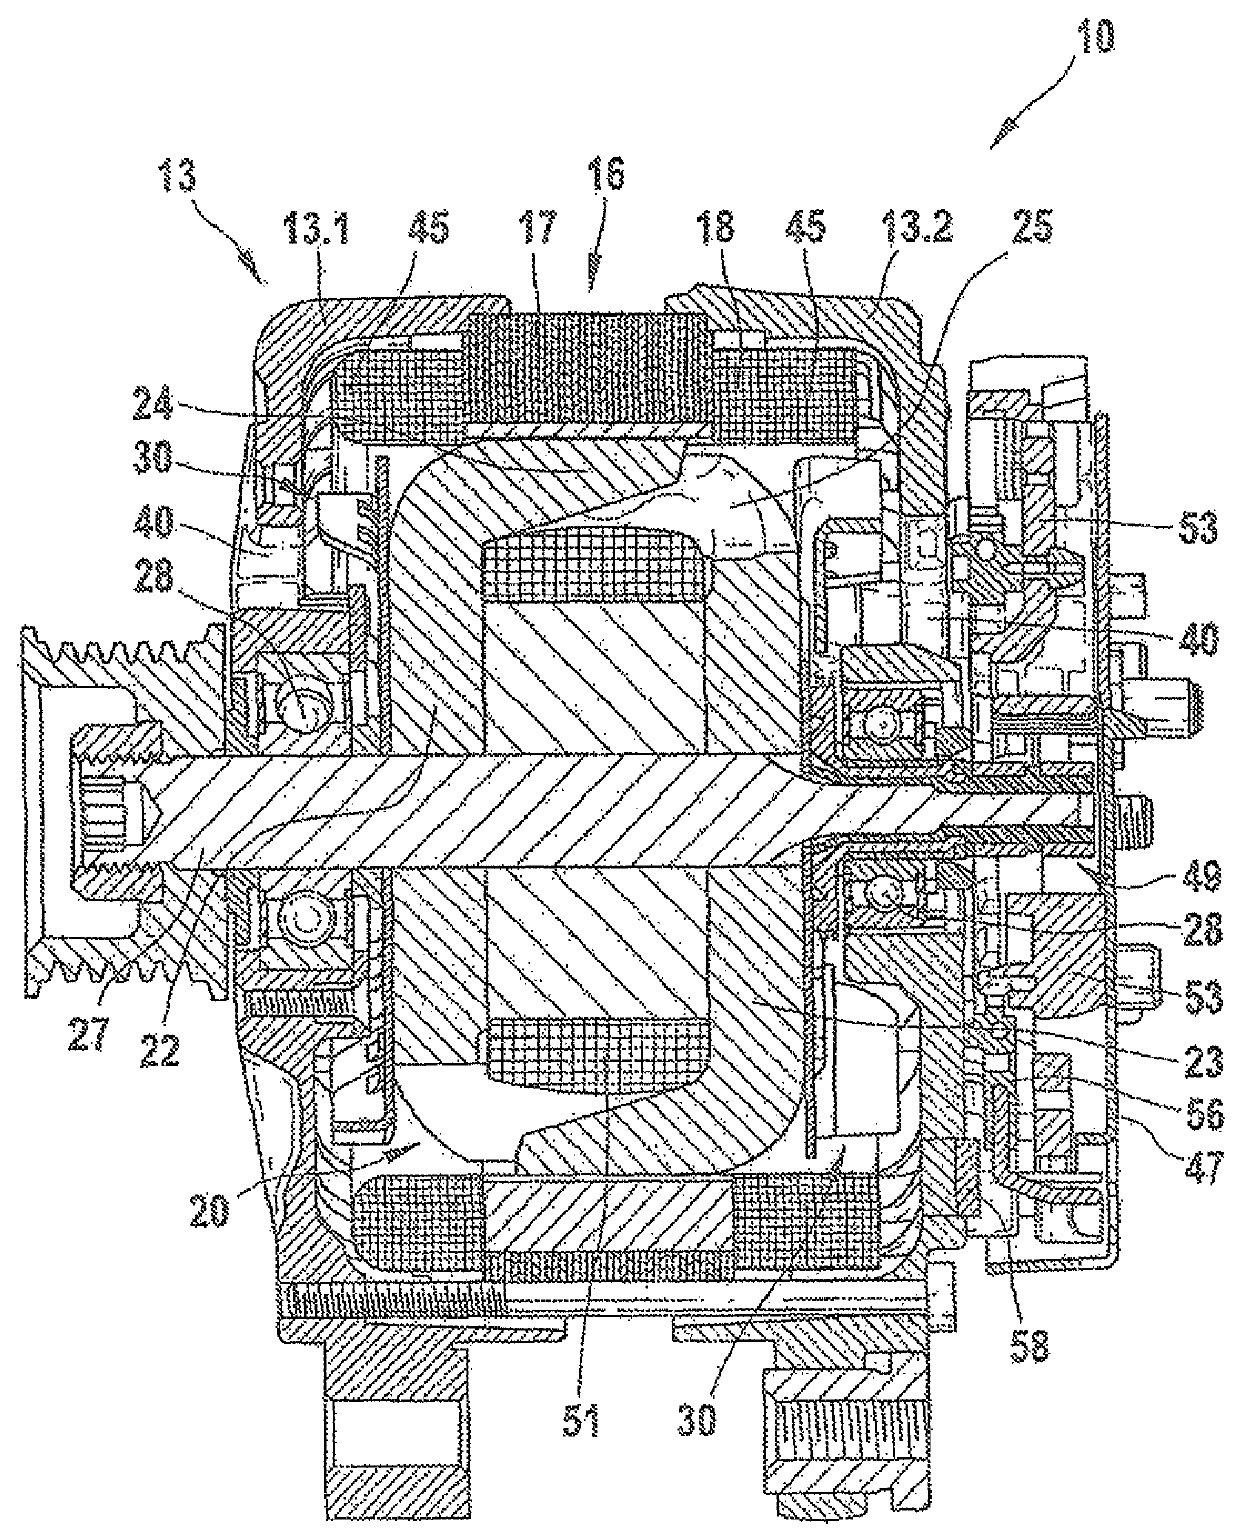 Electrical machine having a contact element for electrically connecting electrical components